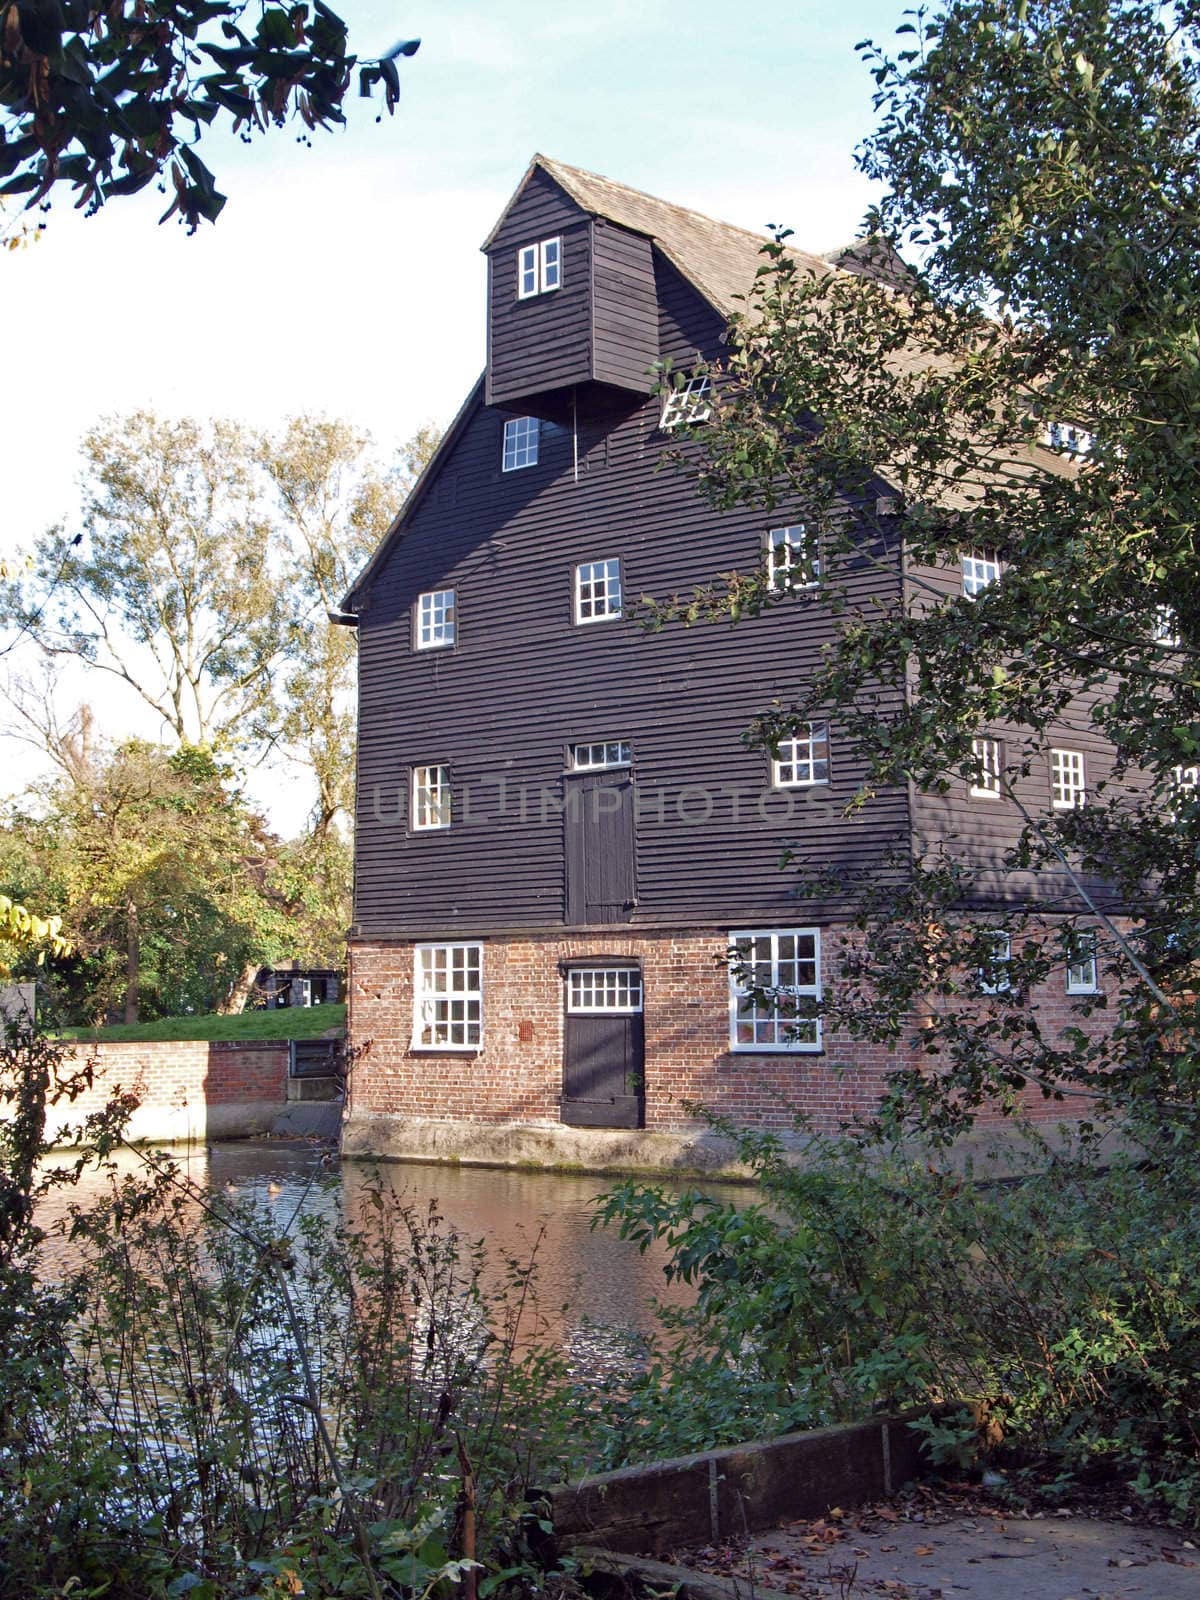 Houghton Mill was built during the 17th Century, it was a working mill with three water wheels untill 1930.